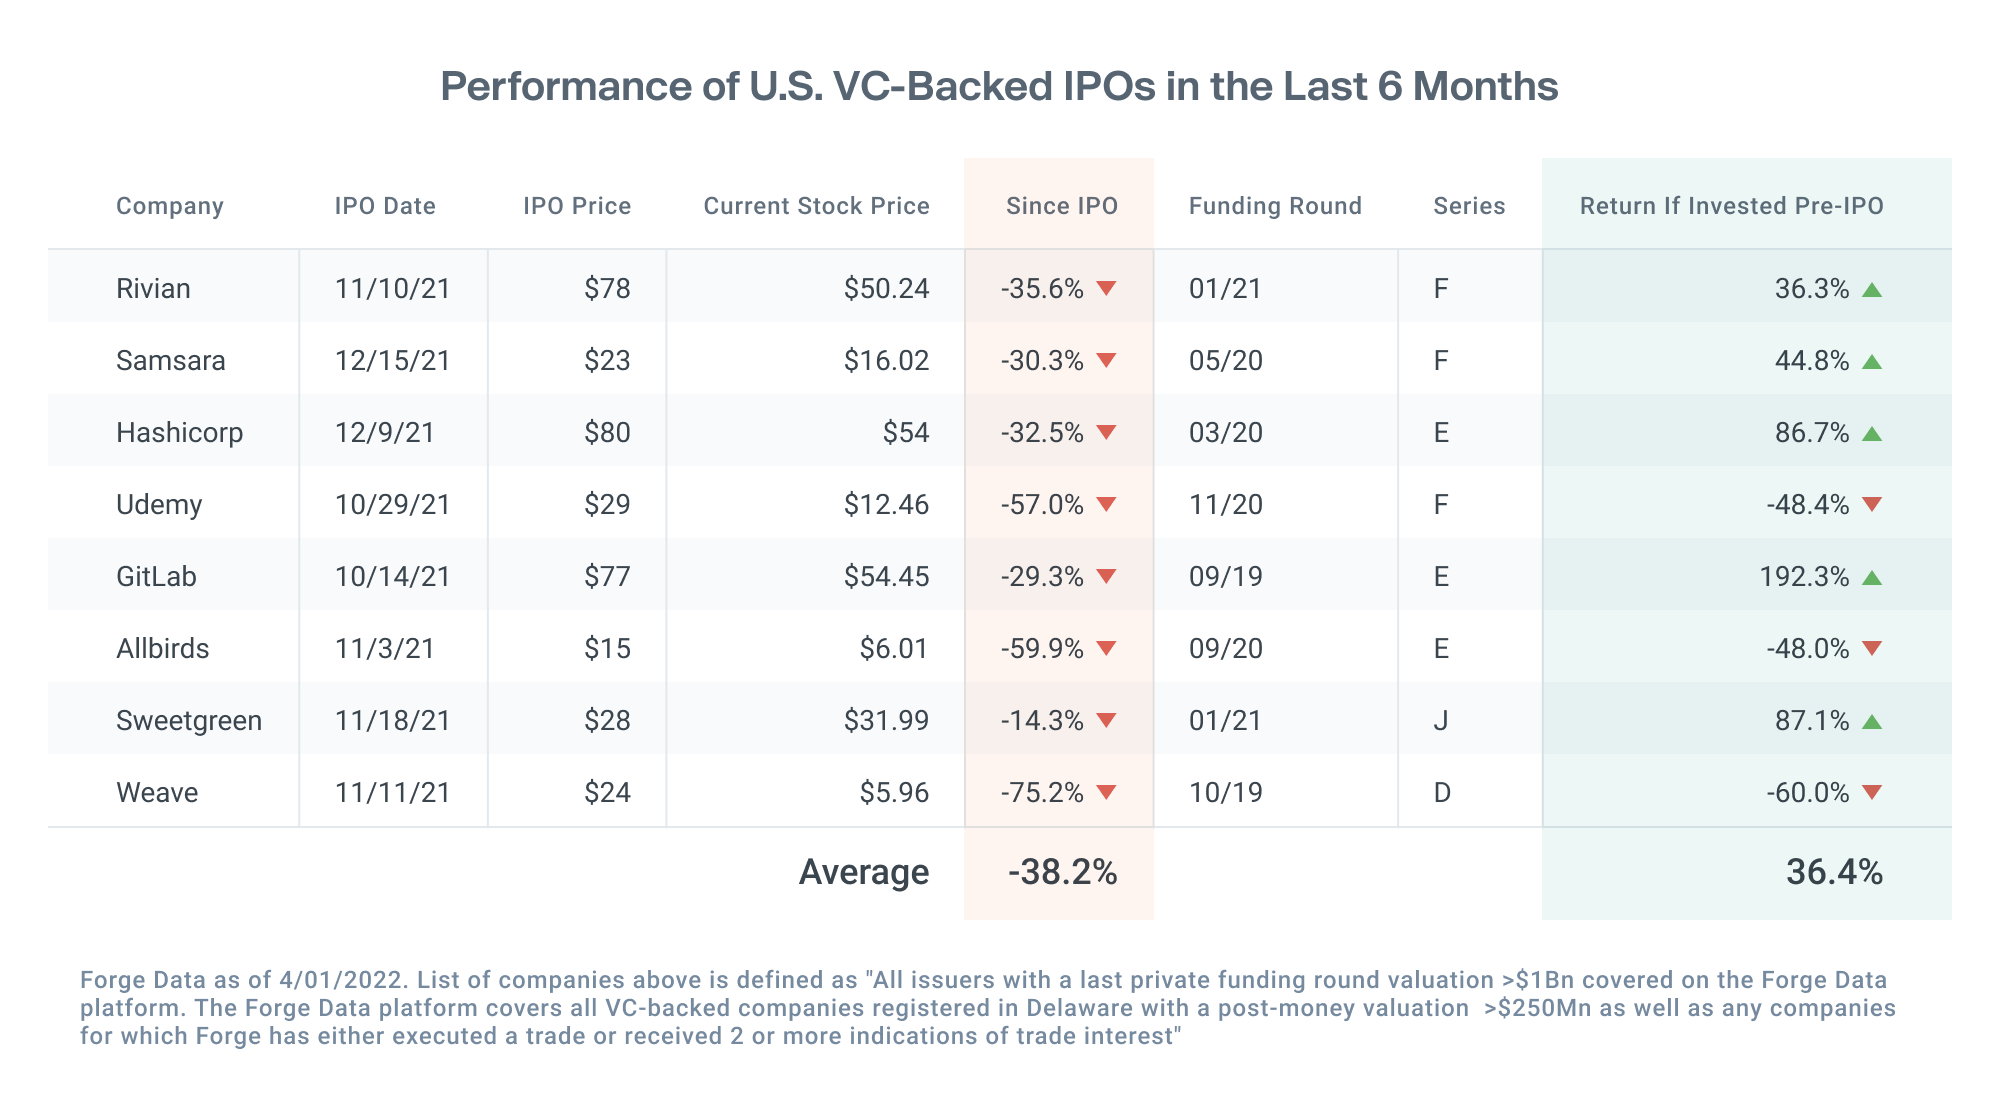 Forge data table showing performance of top US VC backed tech IPOs in the last 6 months, current stock price vs IPO price